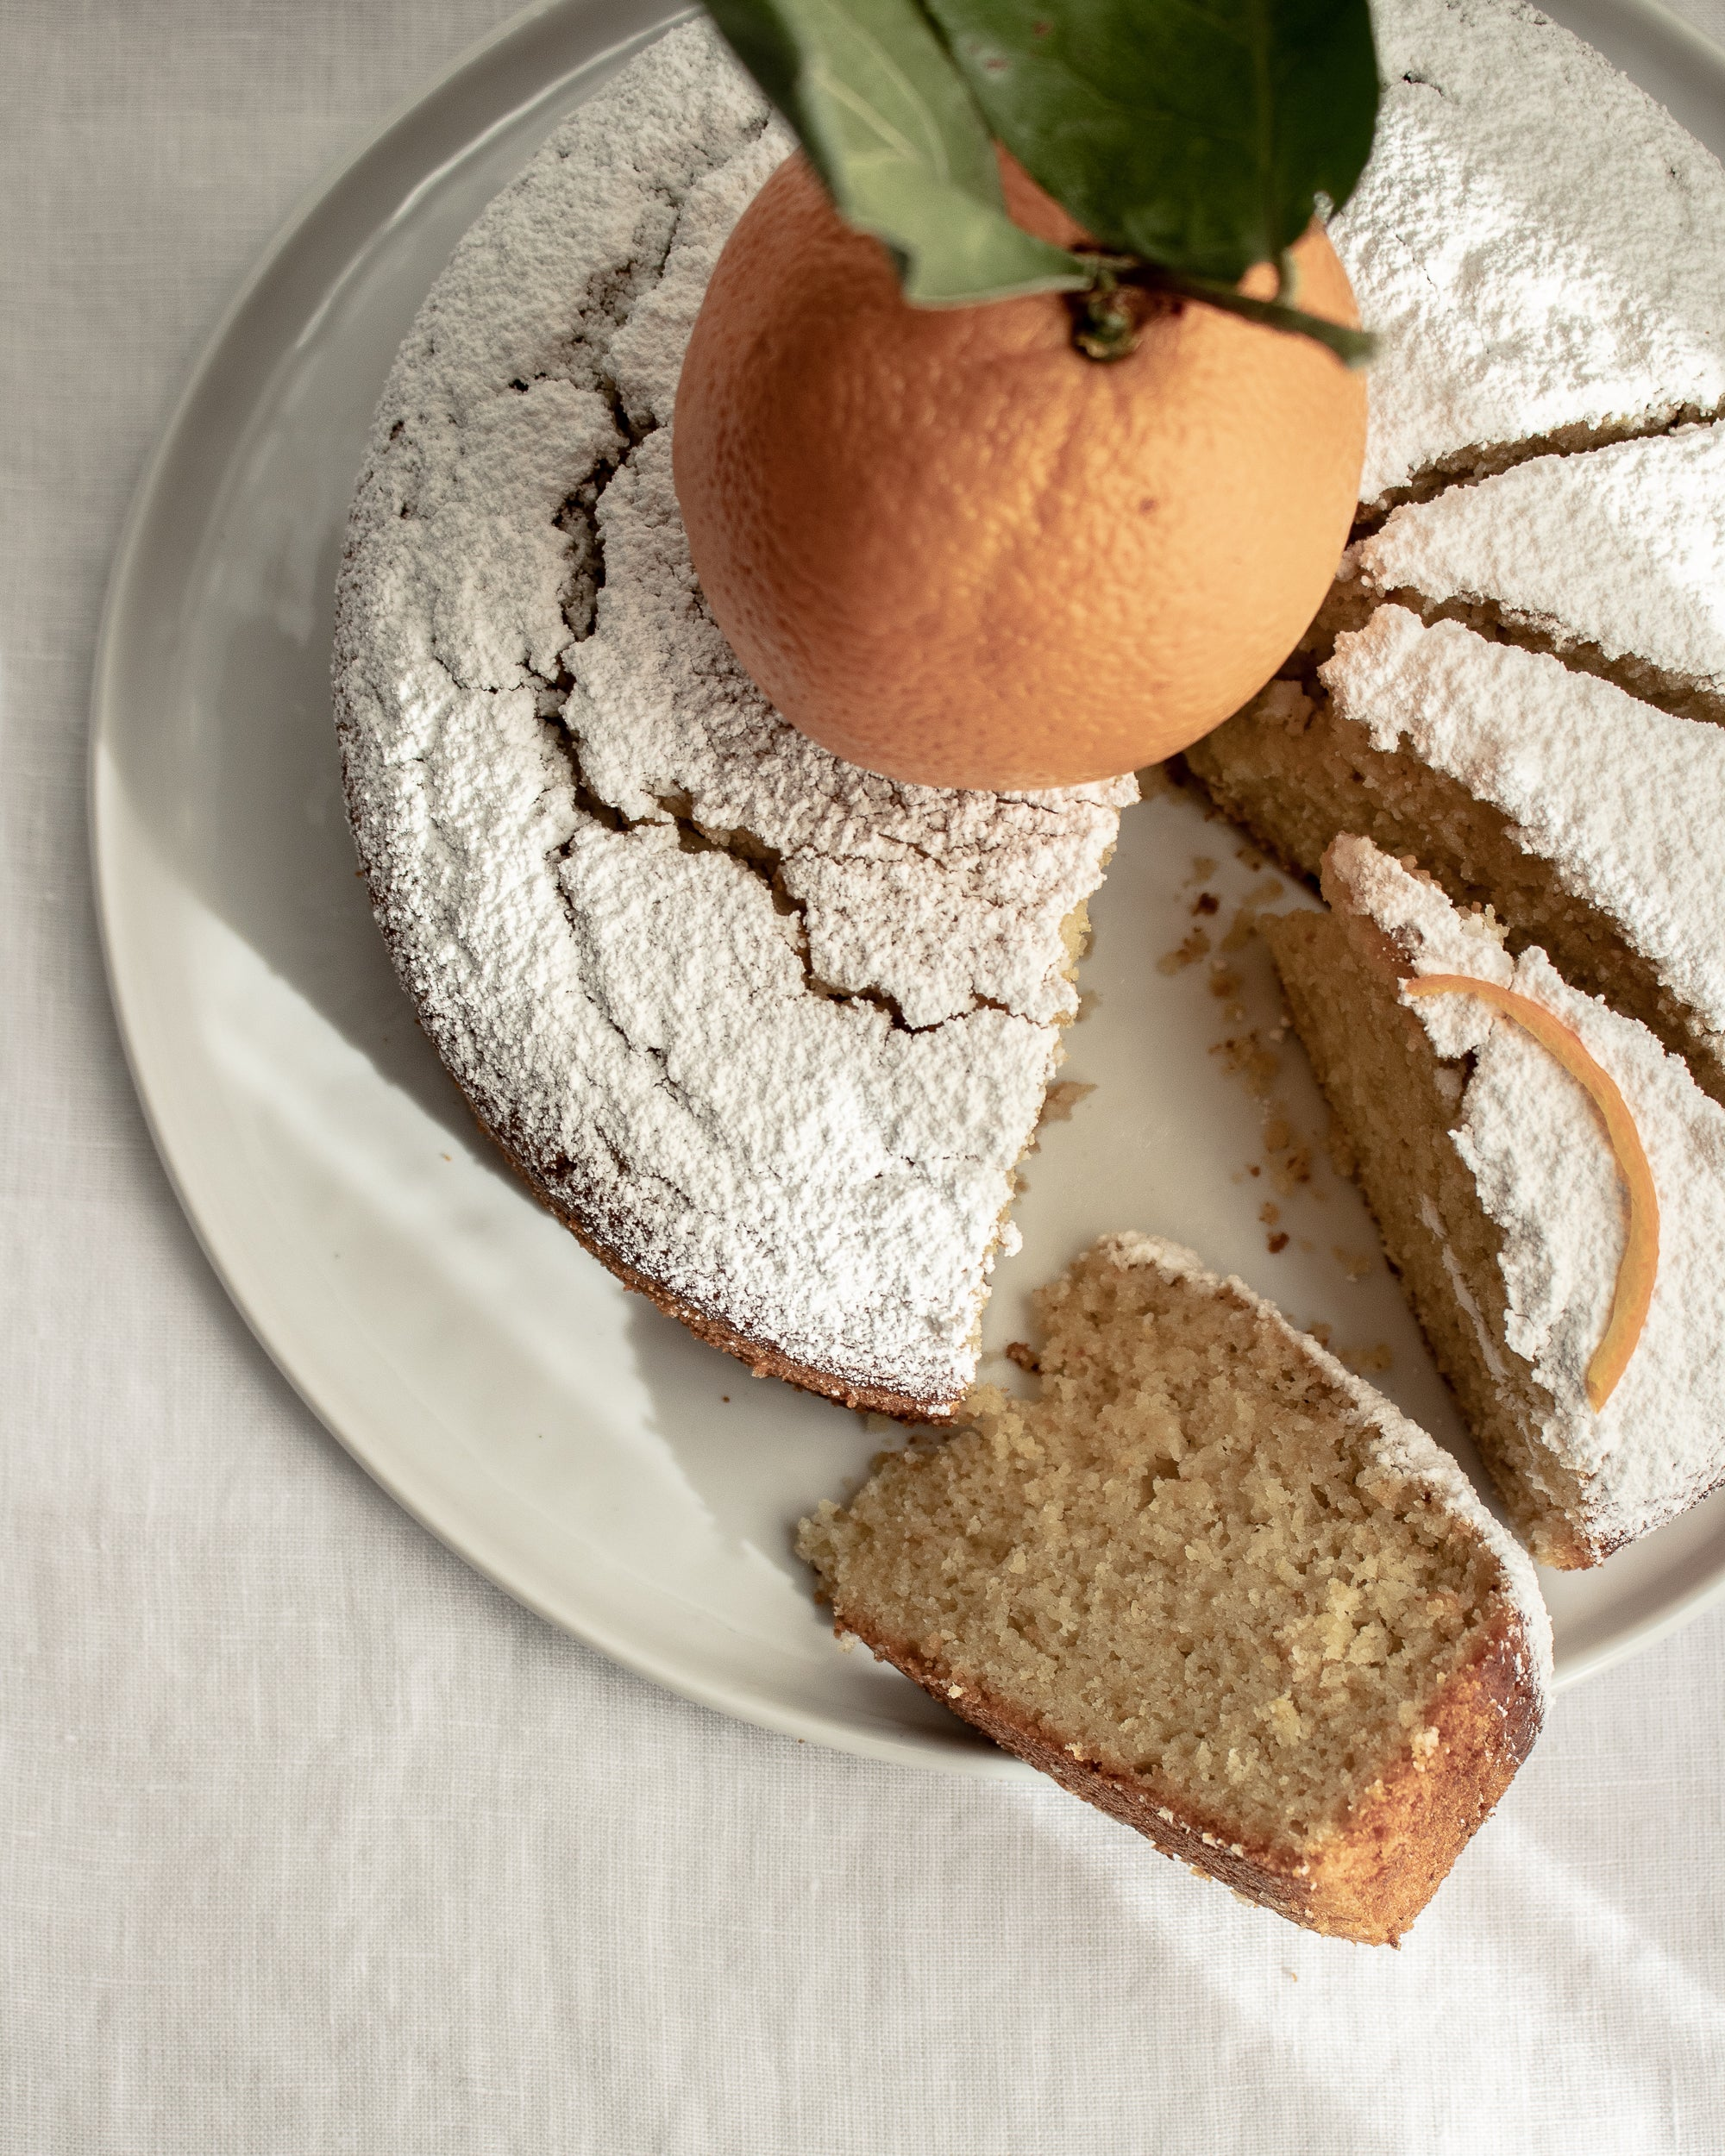 Grecian Olive Oil Cake with Almond and Citrus: The Goddess.